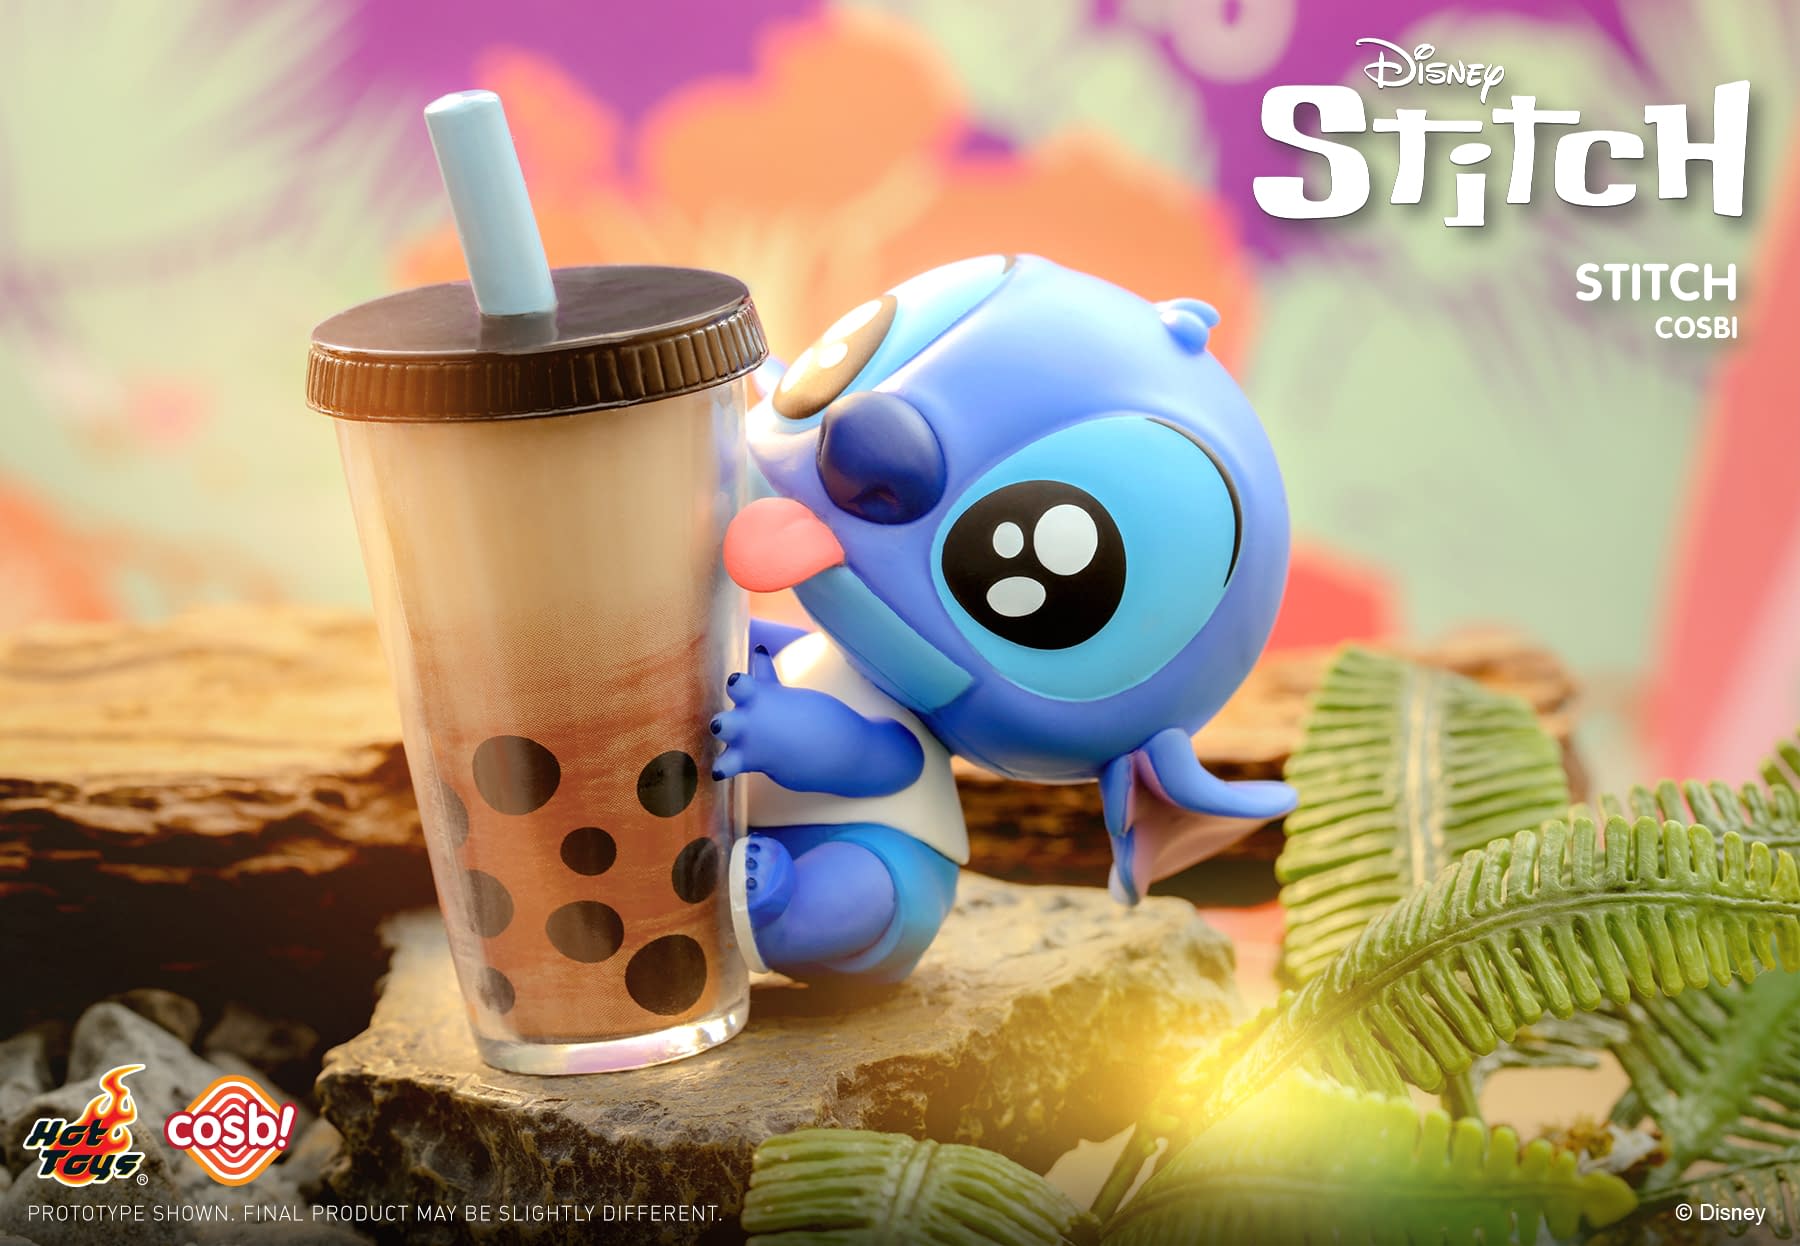 Stitch Welcomes the Summer with New Lilo & Stitch Hot Toys Cosbi's 